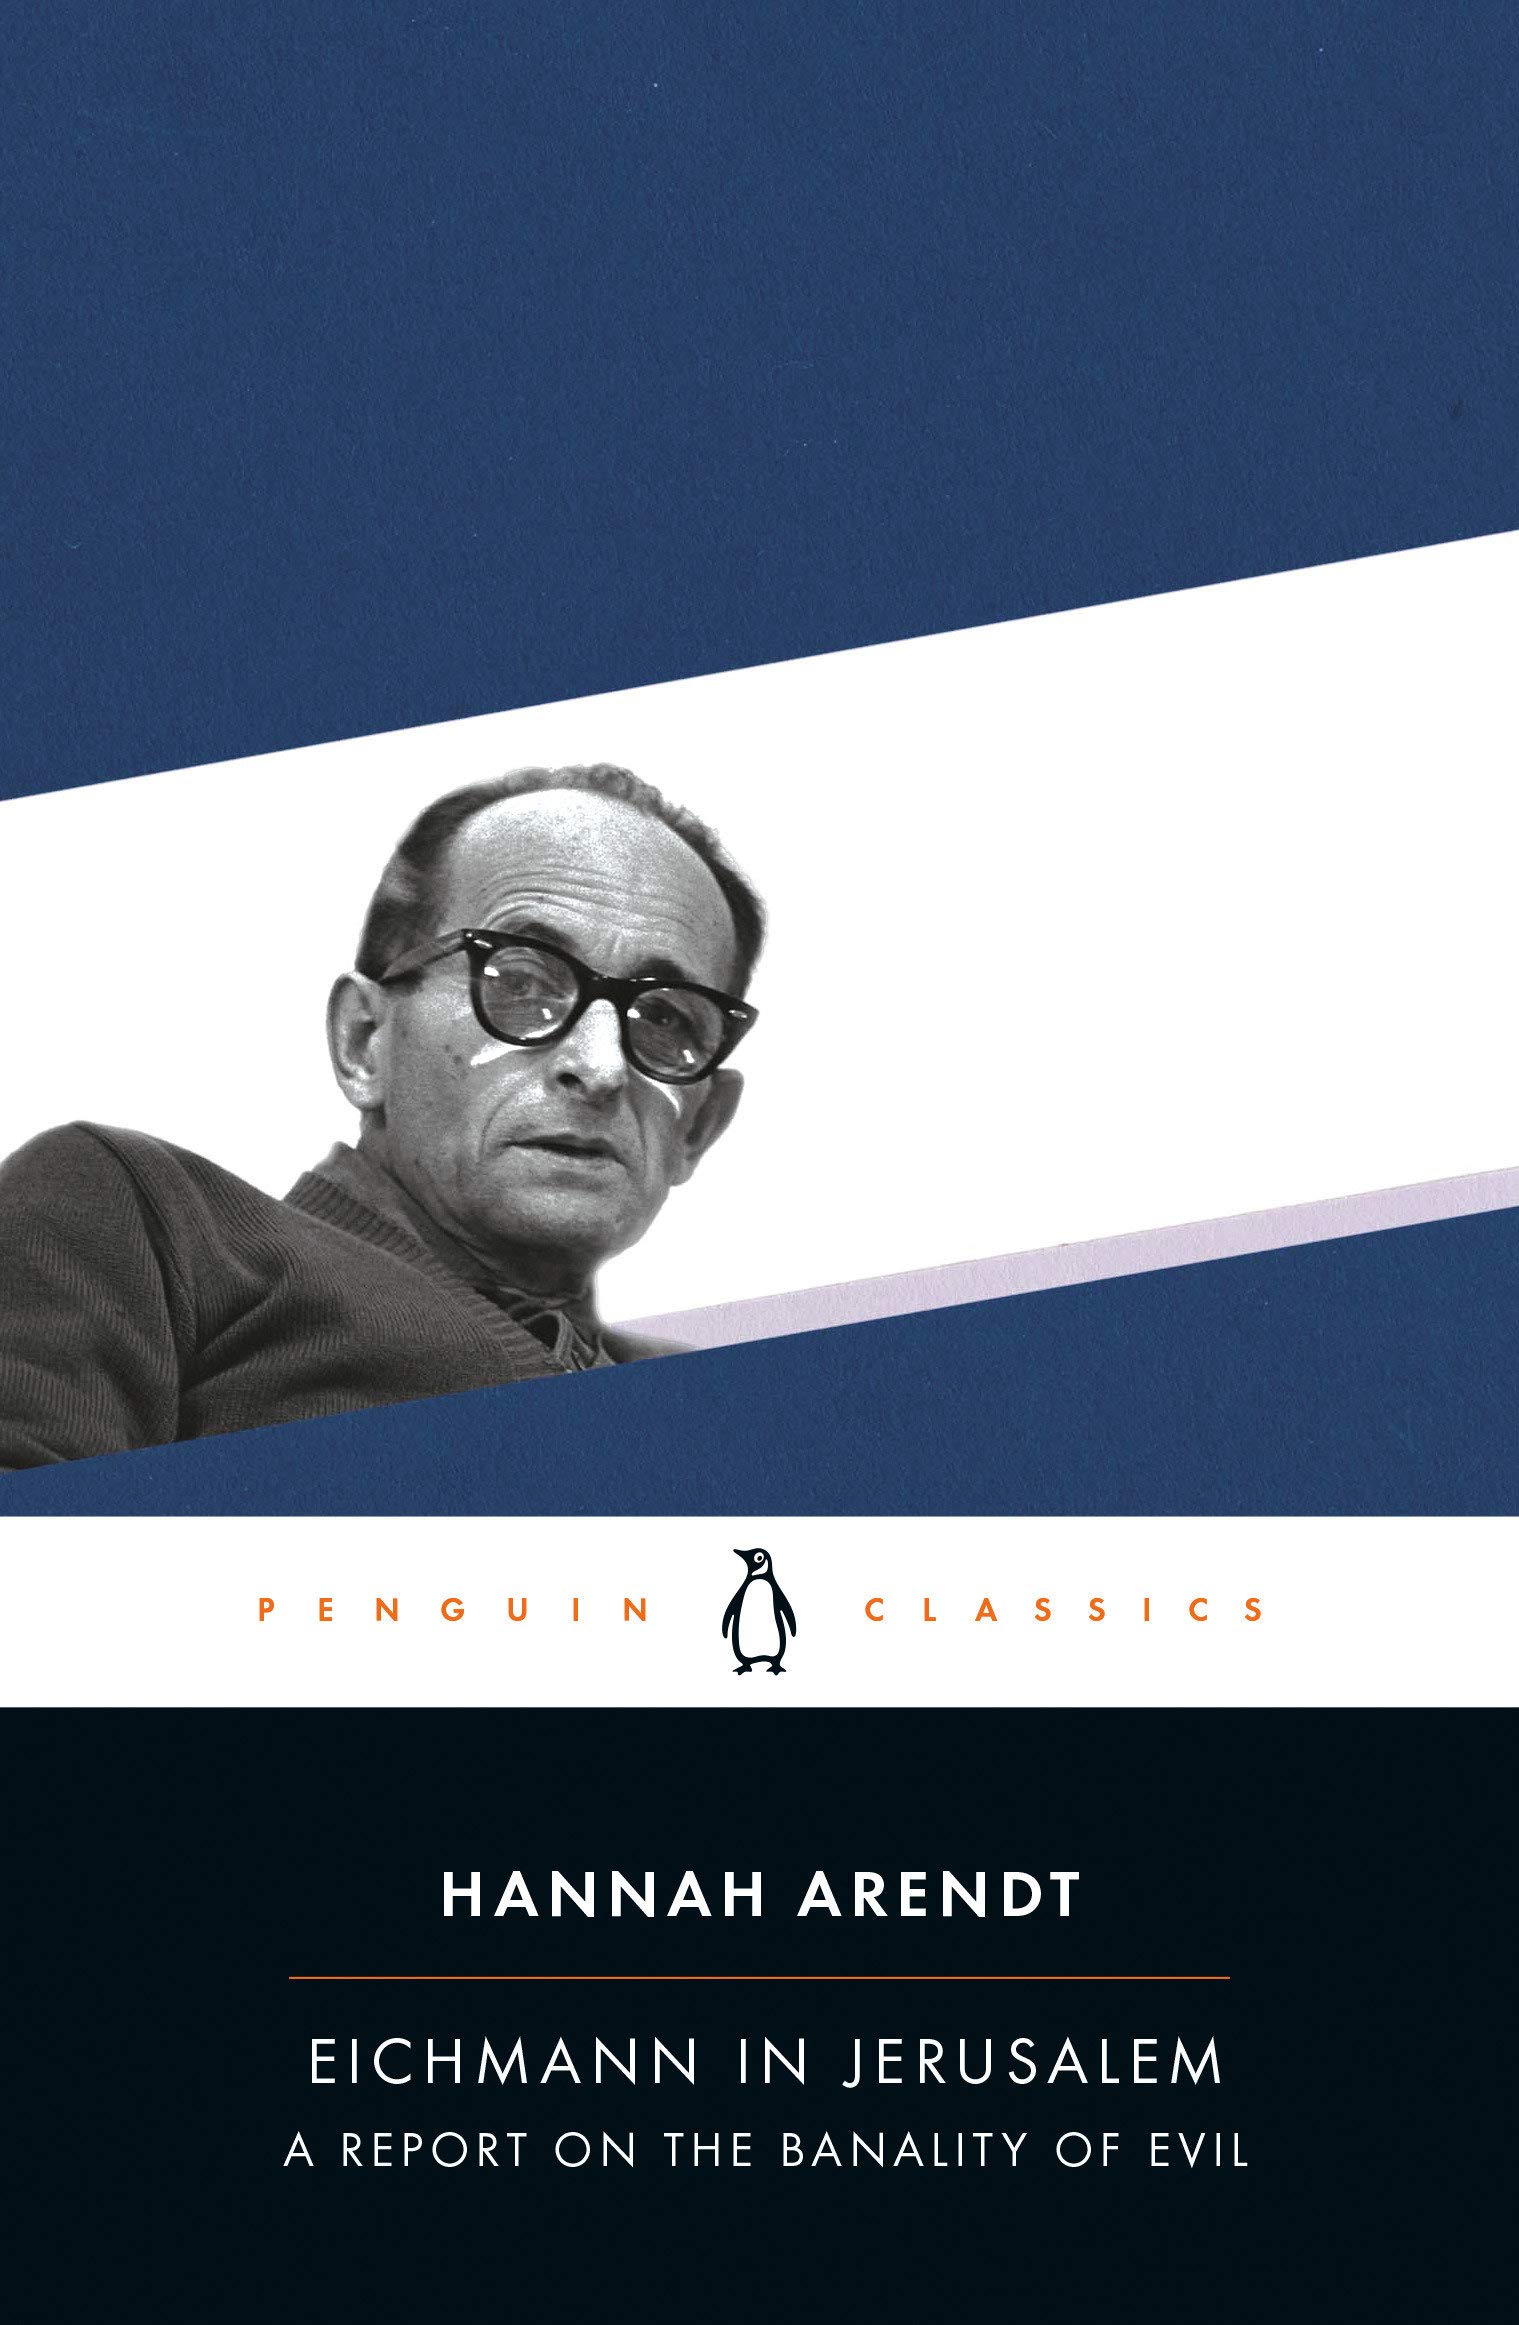 Eichmann in Jerusalem, a Report on the Banality of Evil